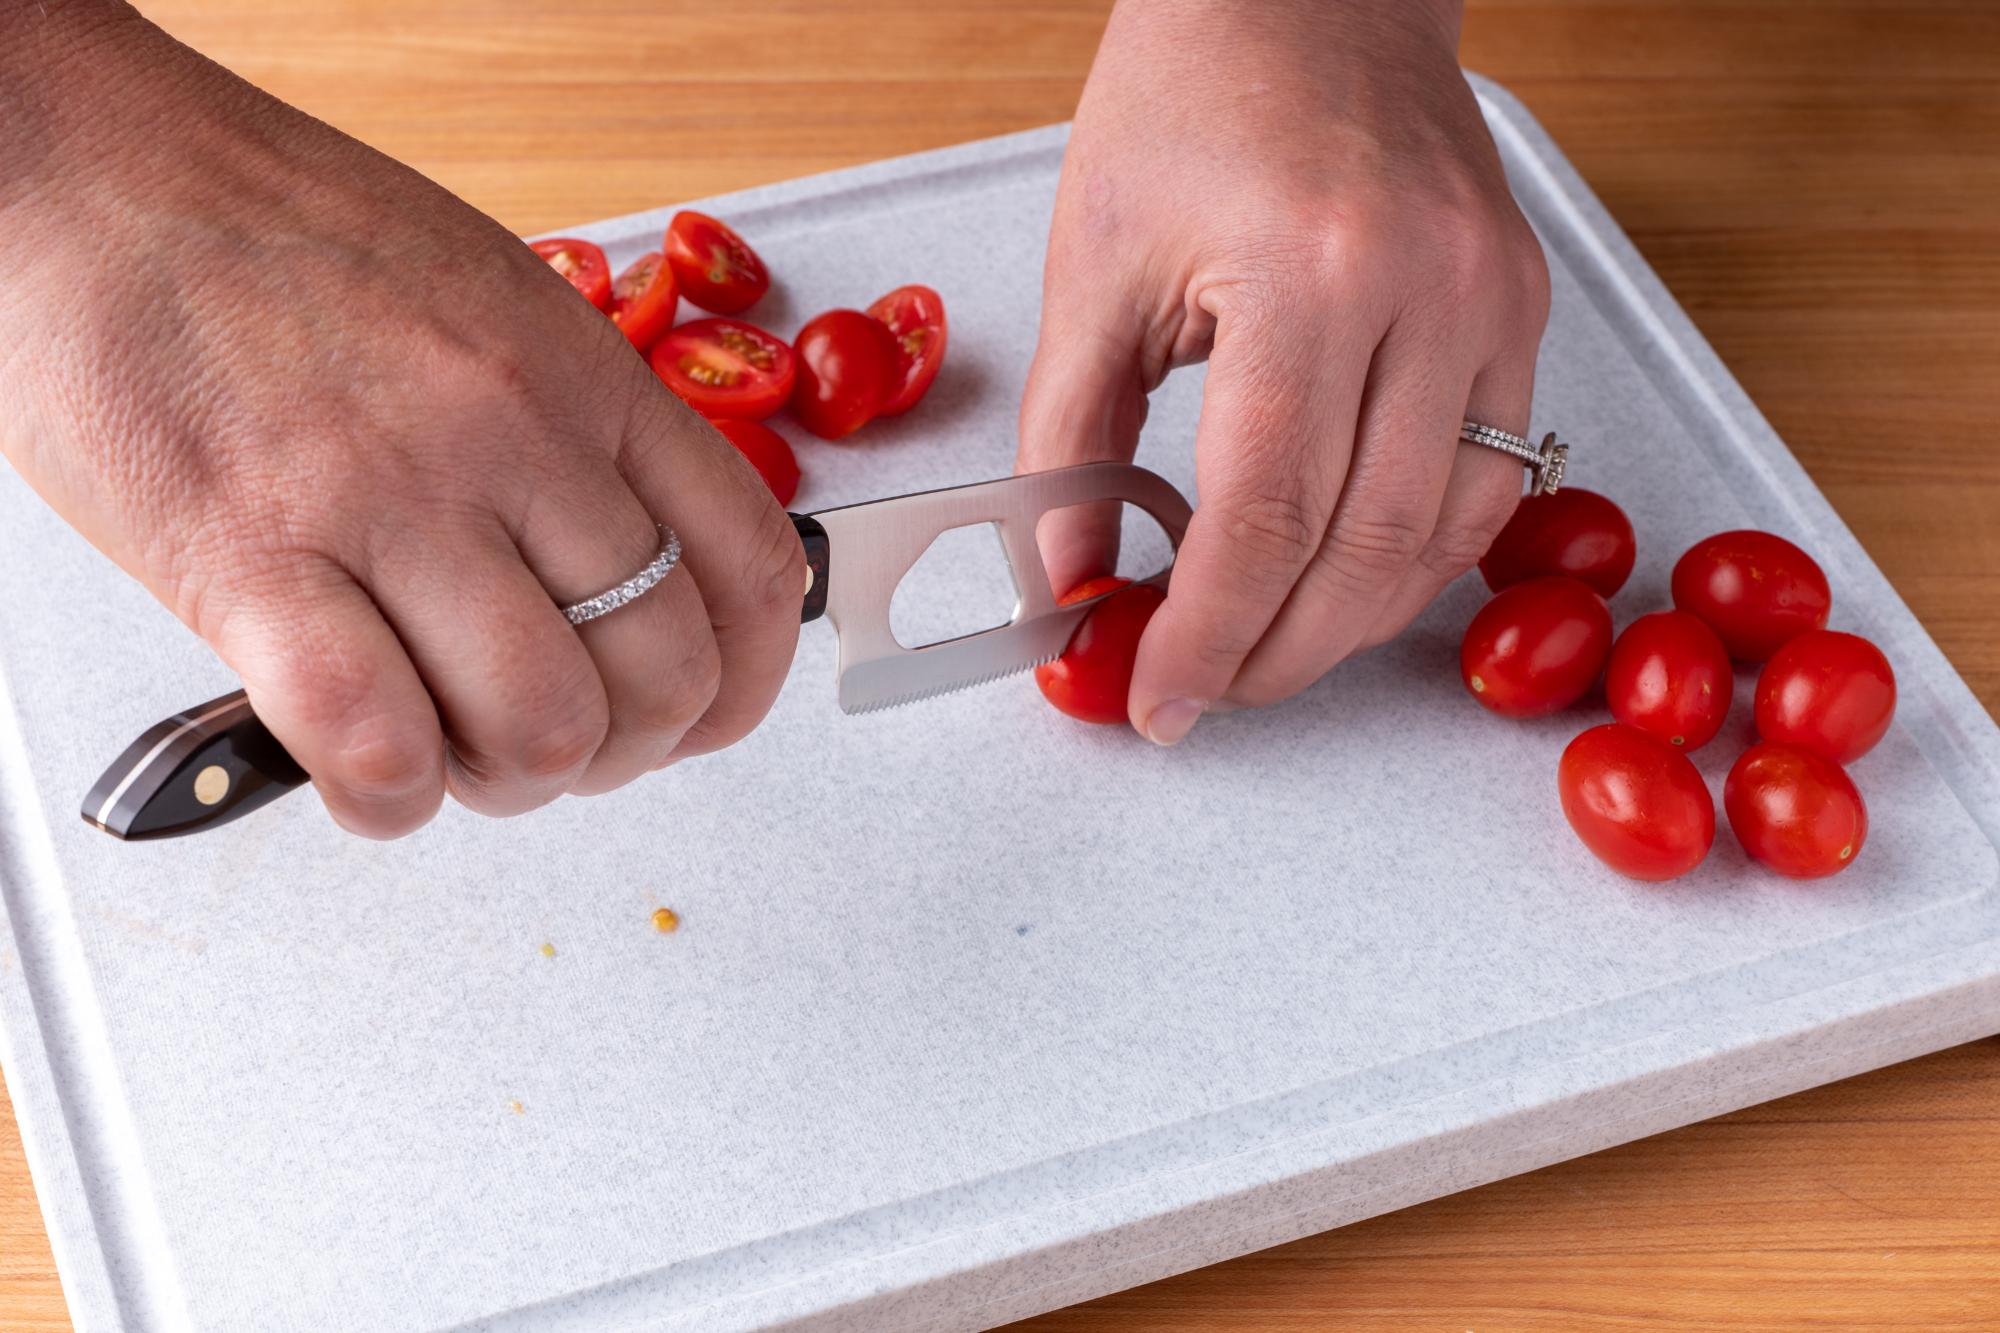 The Santoku-Style Cheese knife is perfect for halving tomatoes